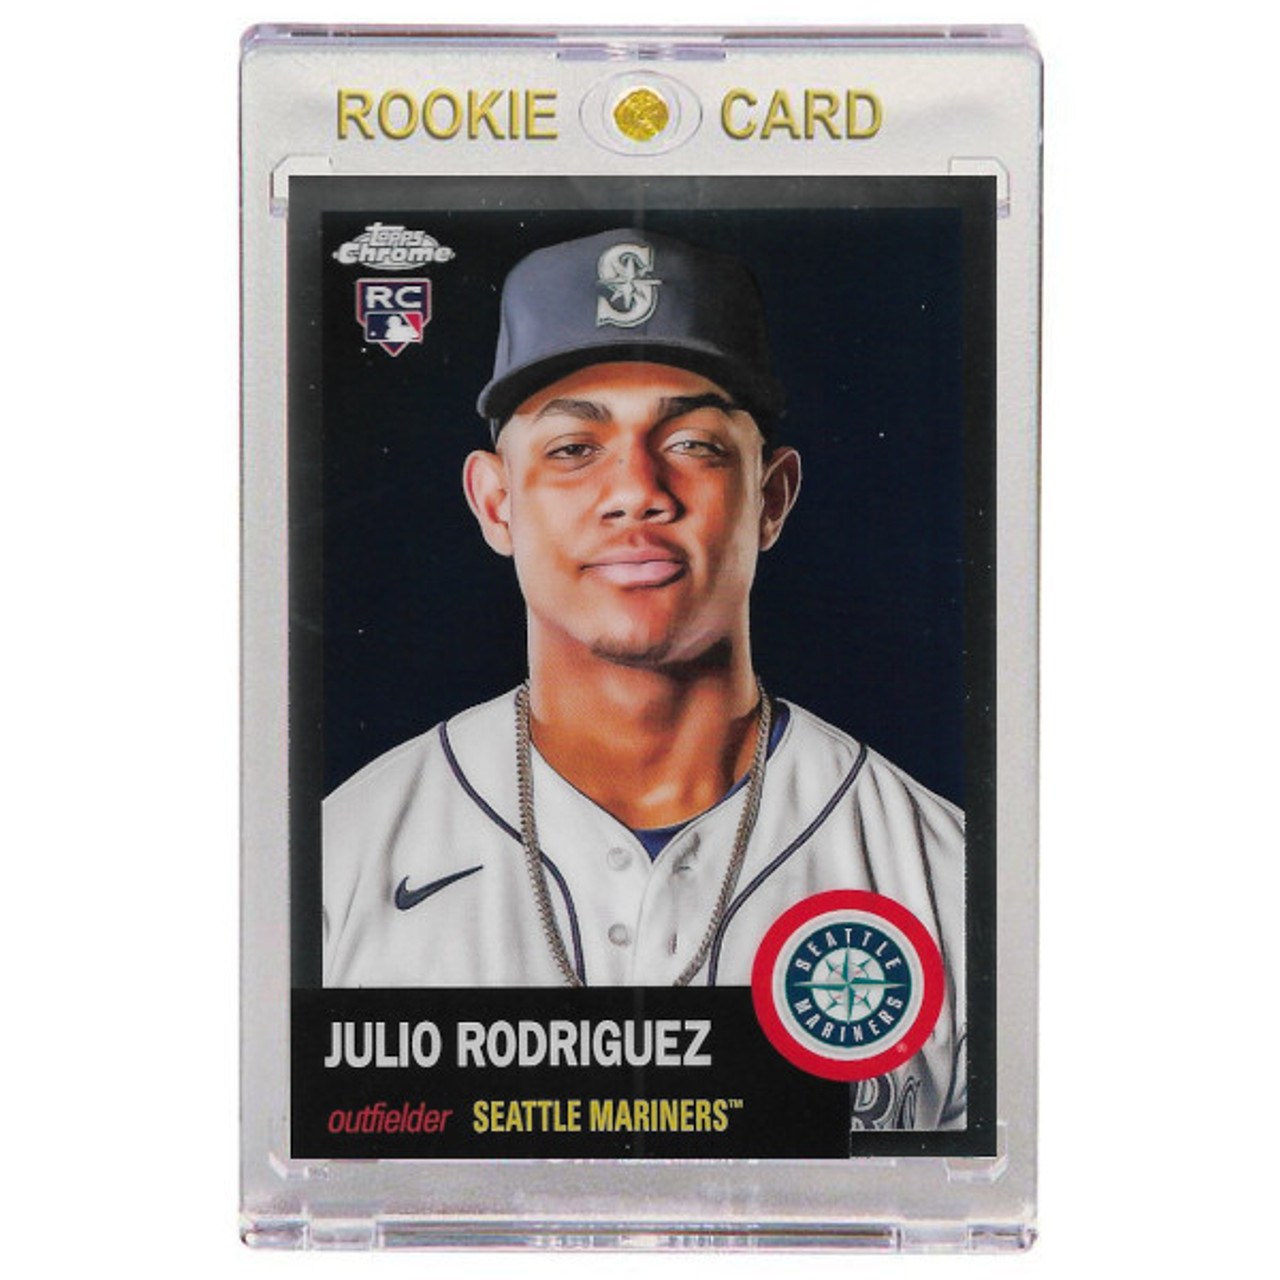 ALL-STAR ROOKIE JULIO RODRIGUEZ AUTOGRAPH SEATTLE MARINERS CUSTOM